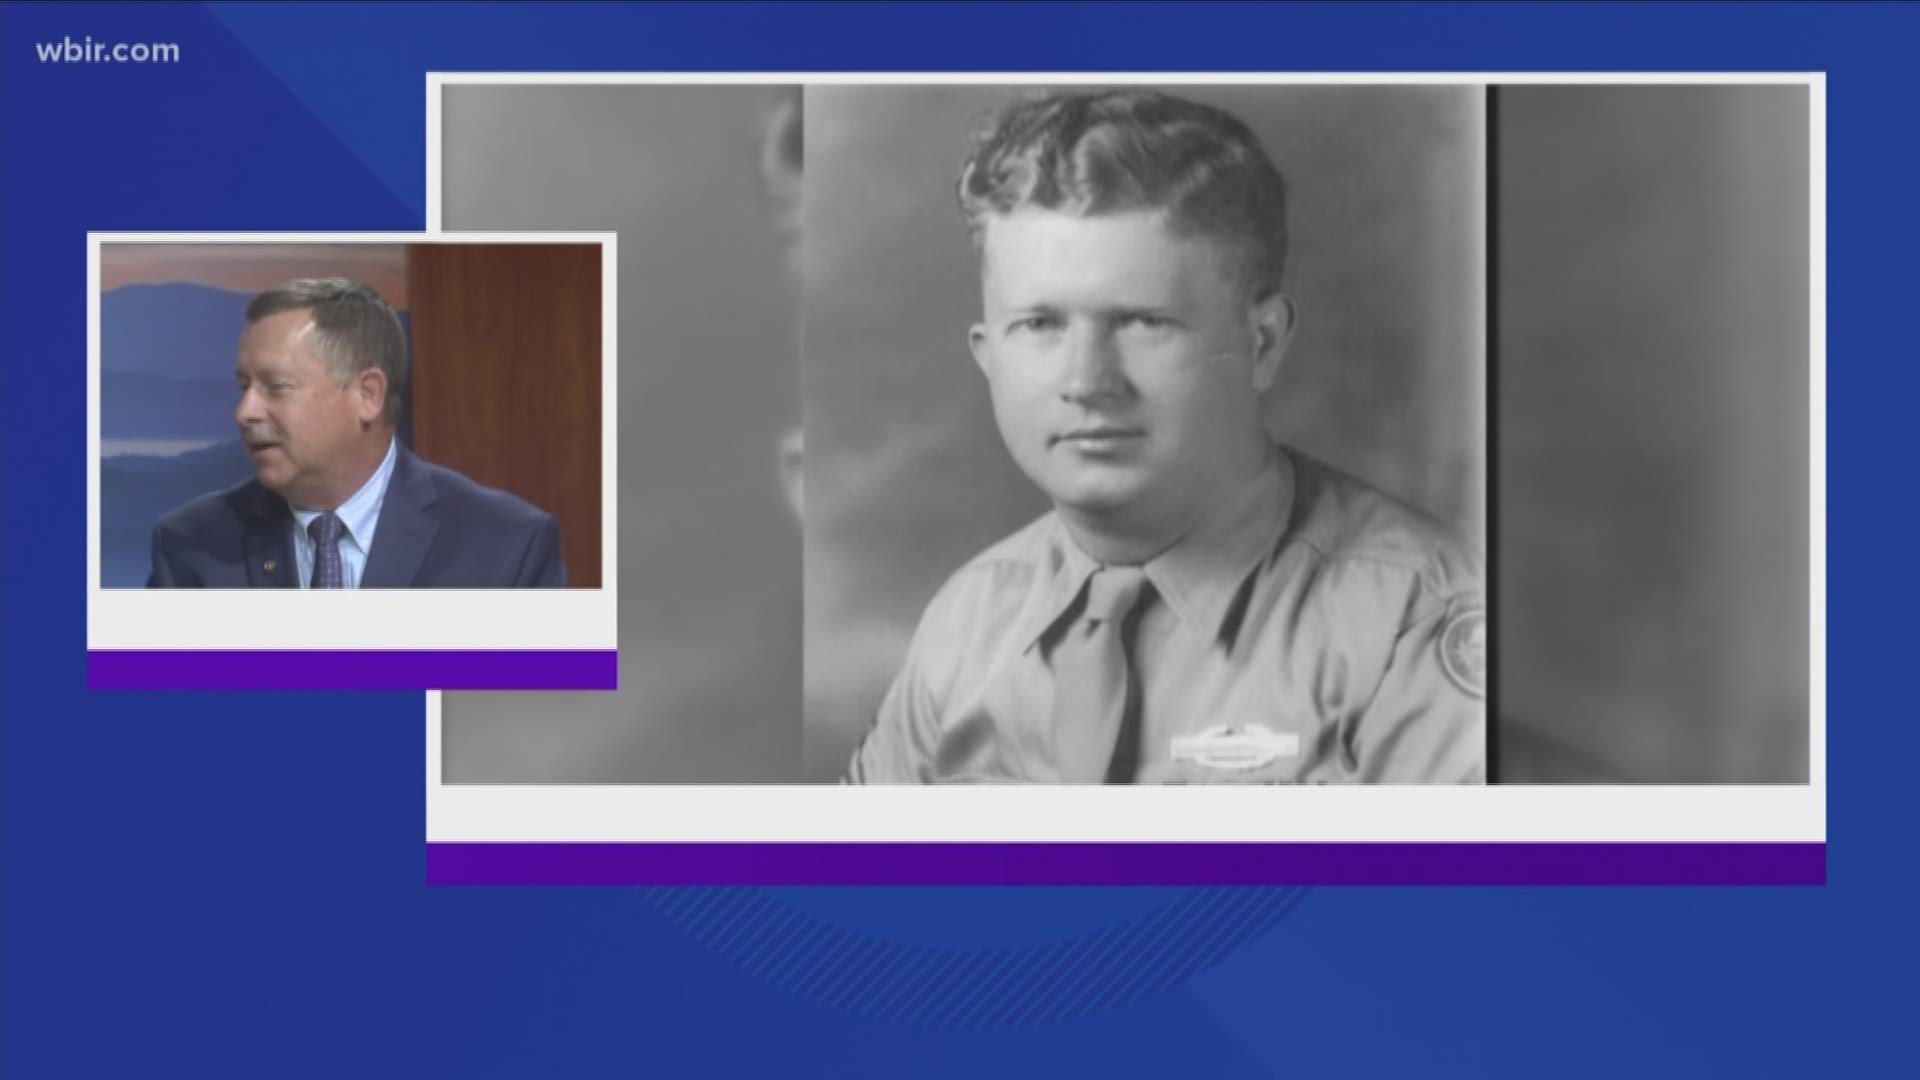 "No Surrender" tells the story of Master Sgt. Roddie Edmonds, who stood up to Nazi guards to protect Jews in a prison camp.